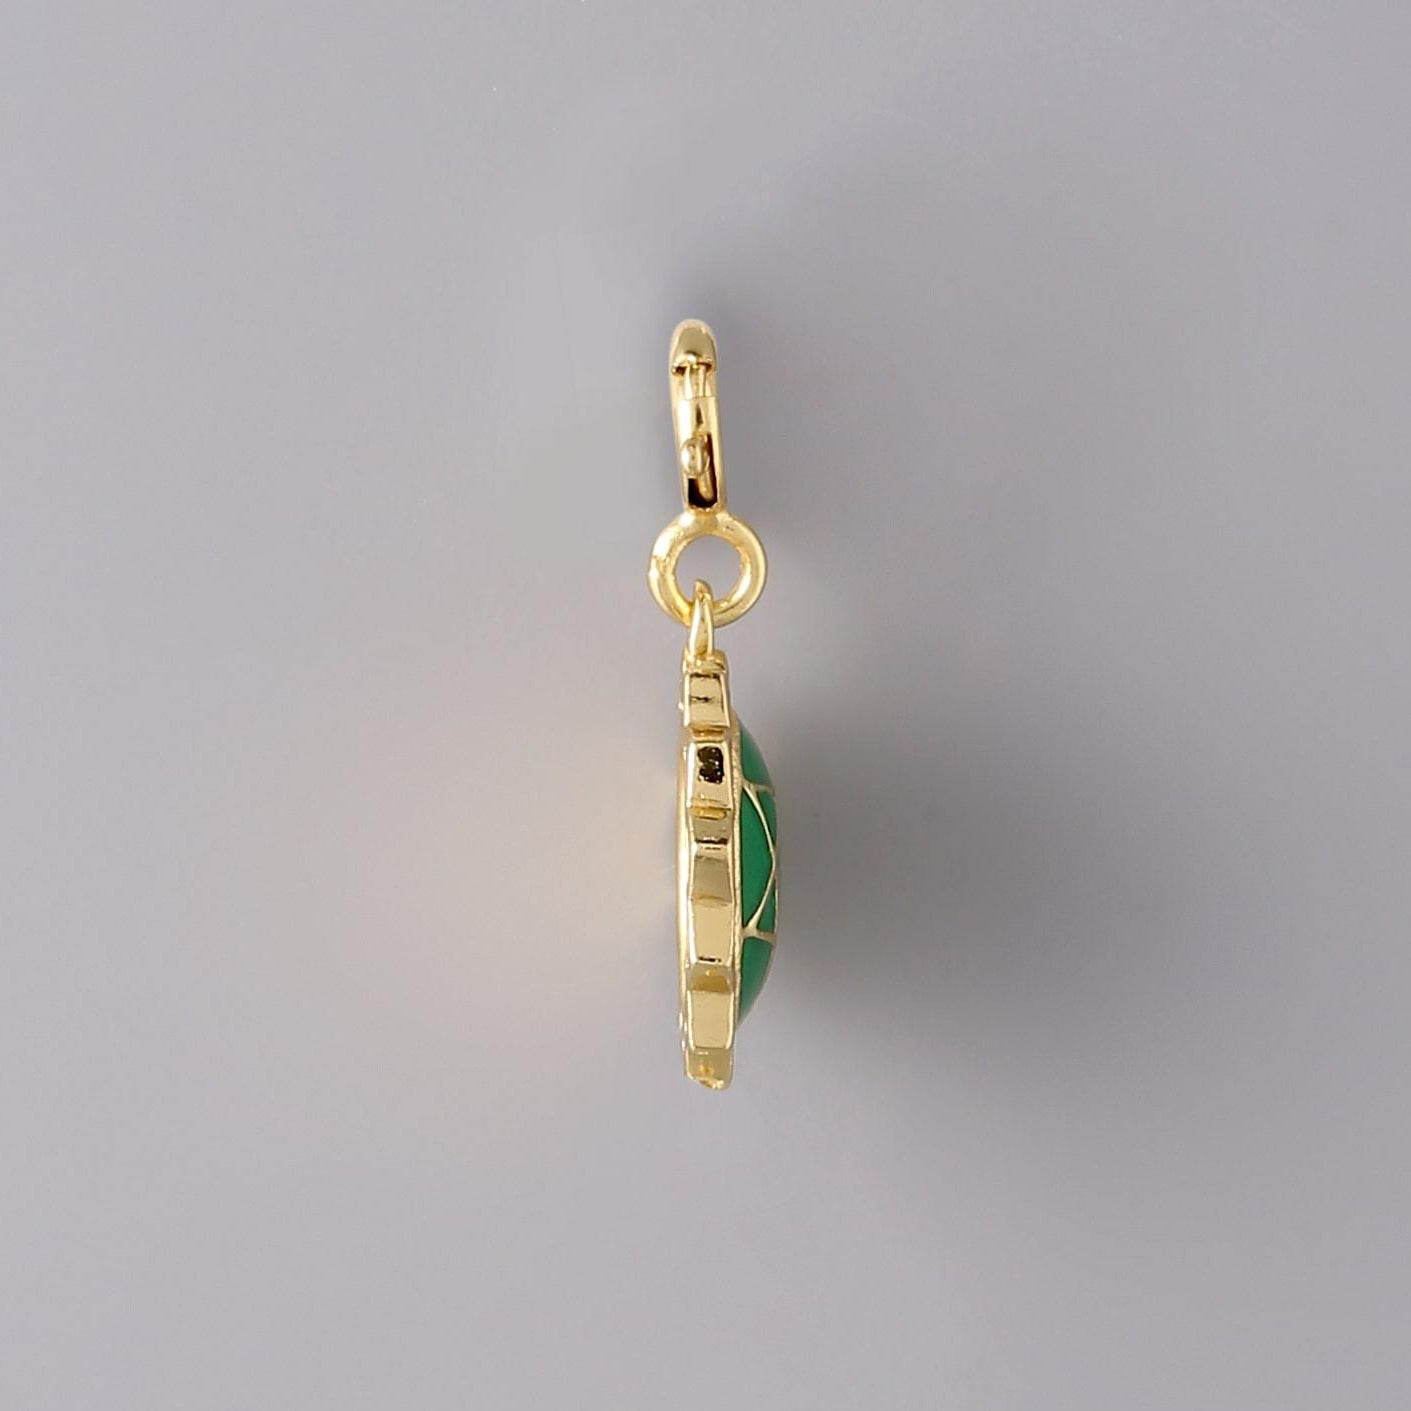 Anahata gold charm - side view